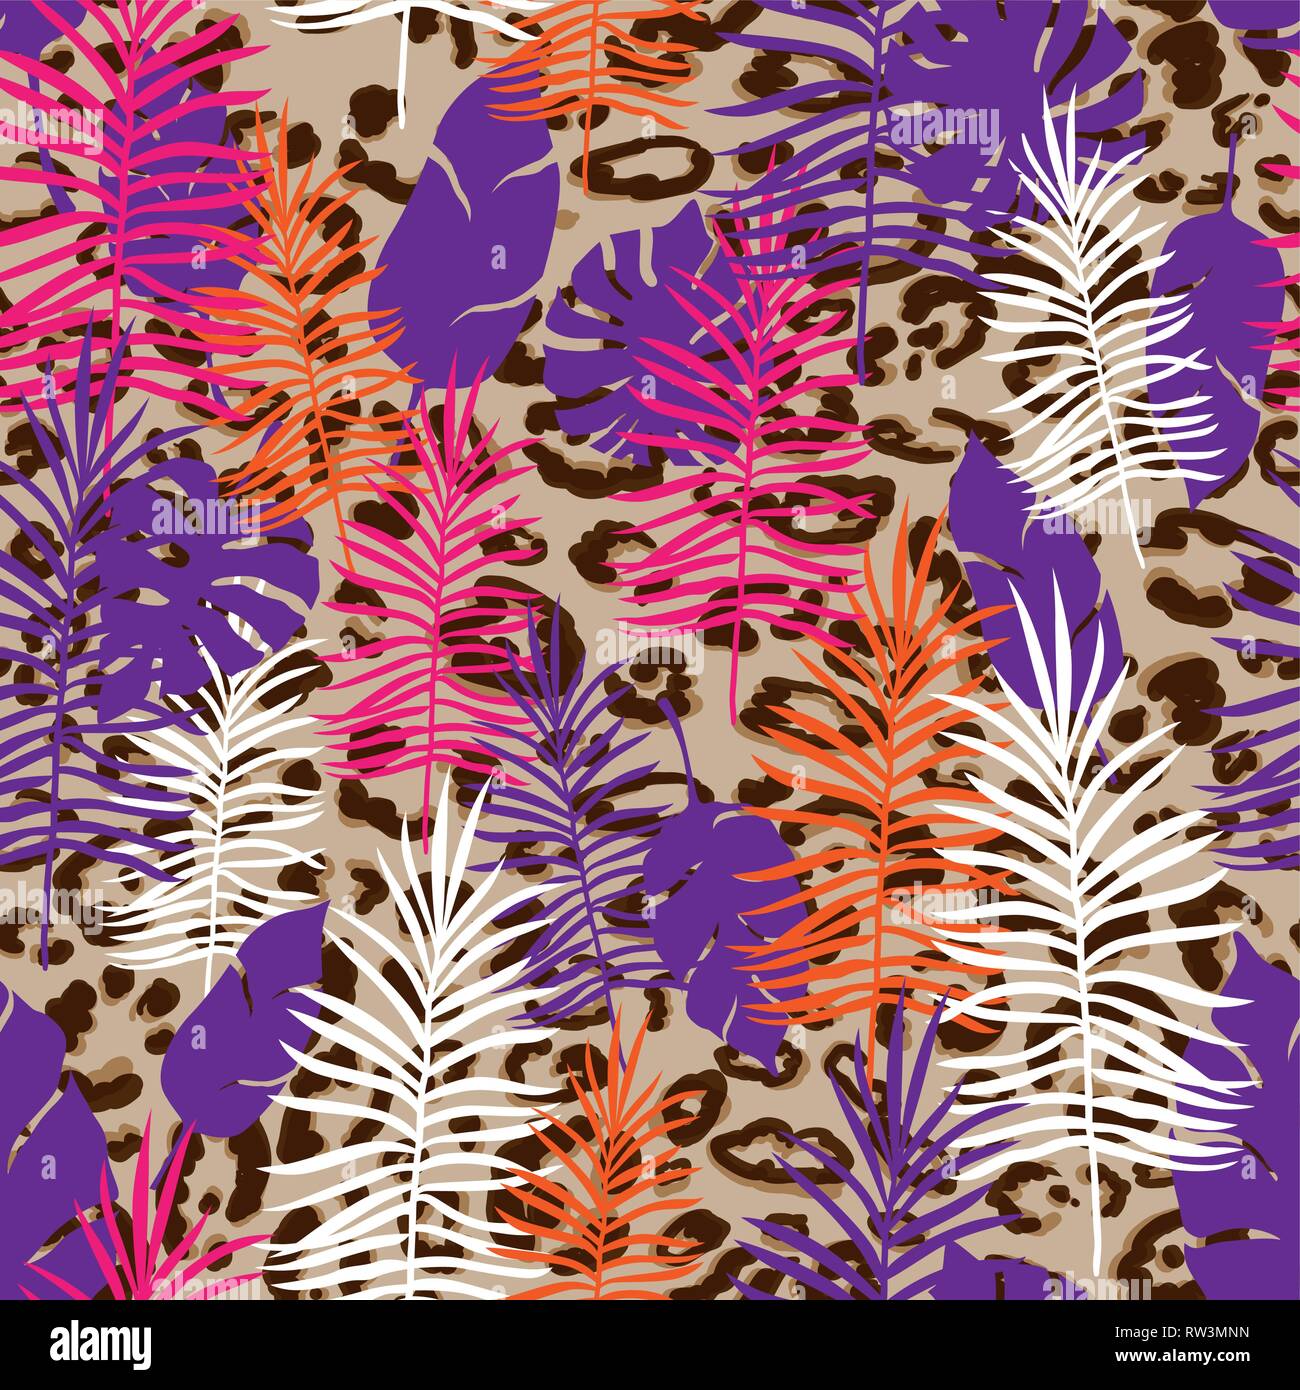 Seamless Pattern Exotic Floral Background. Tropical Flowers and Leaves on leopard skin print. Stock Vector